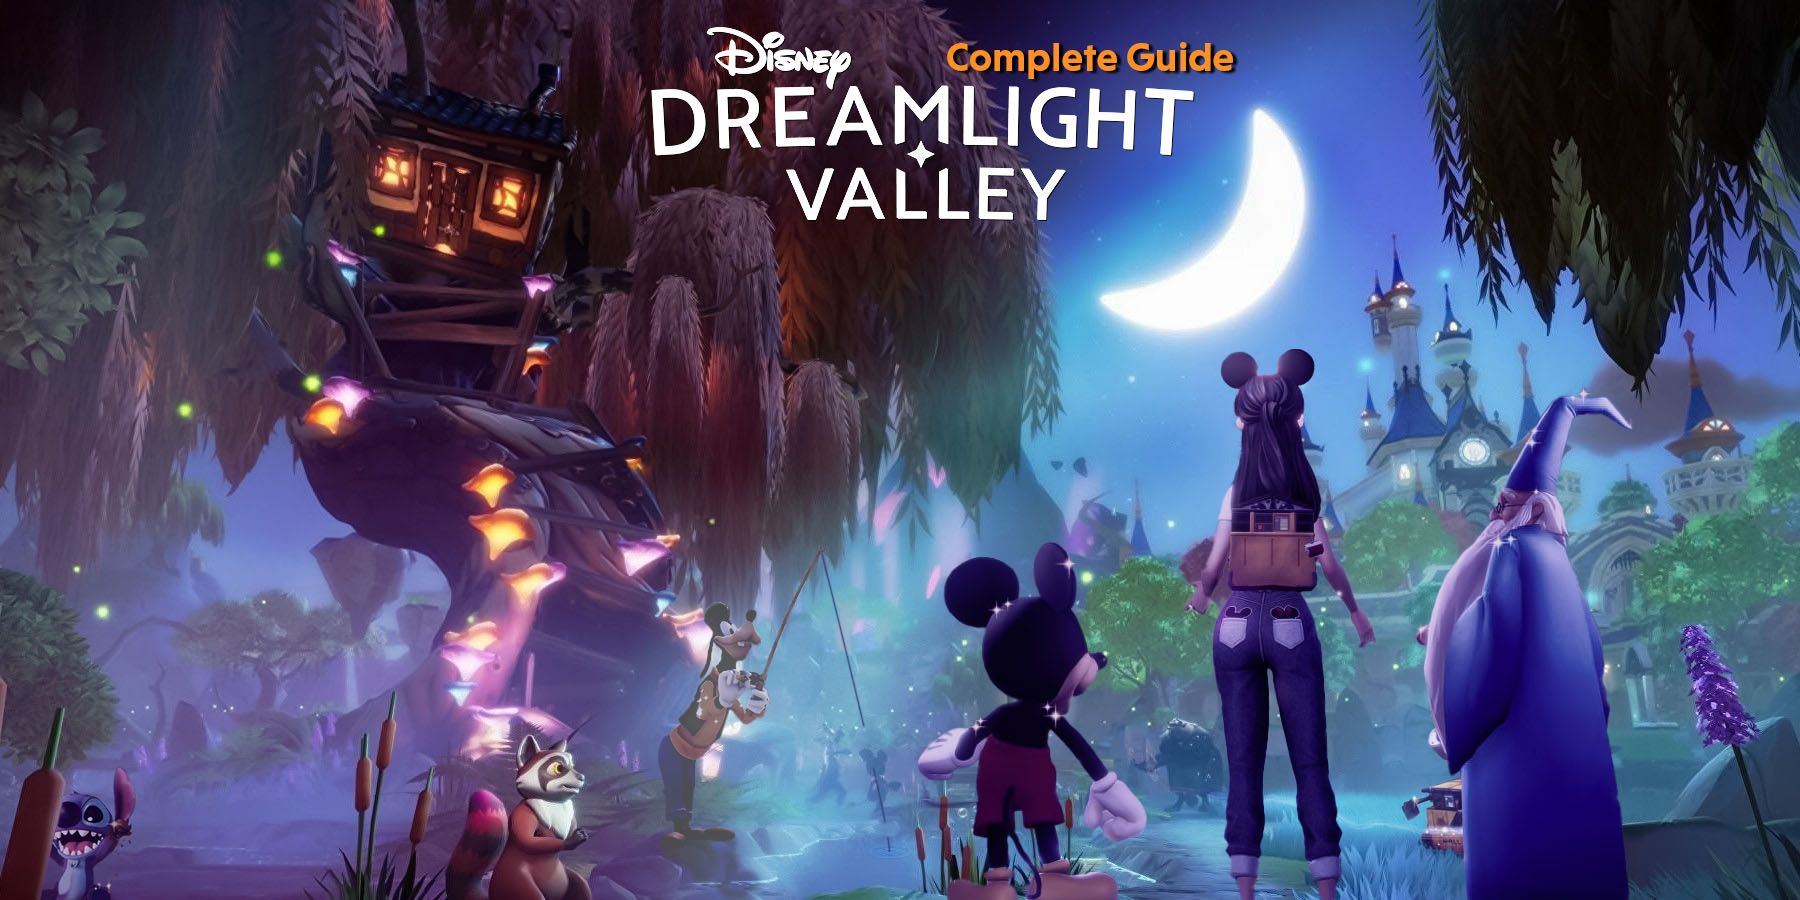 Disney Dreamlight Valley Guide – Materials, Crafting, Quests, Recipes, and More